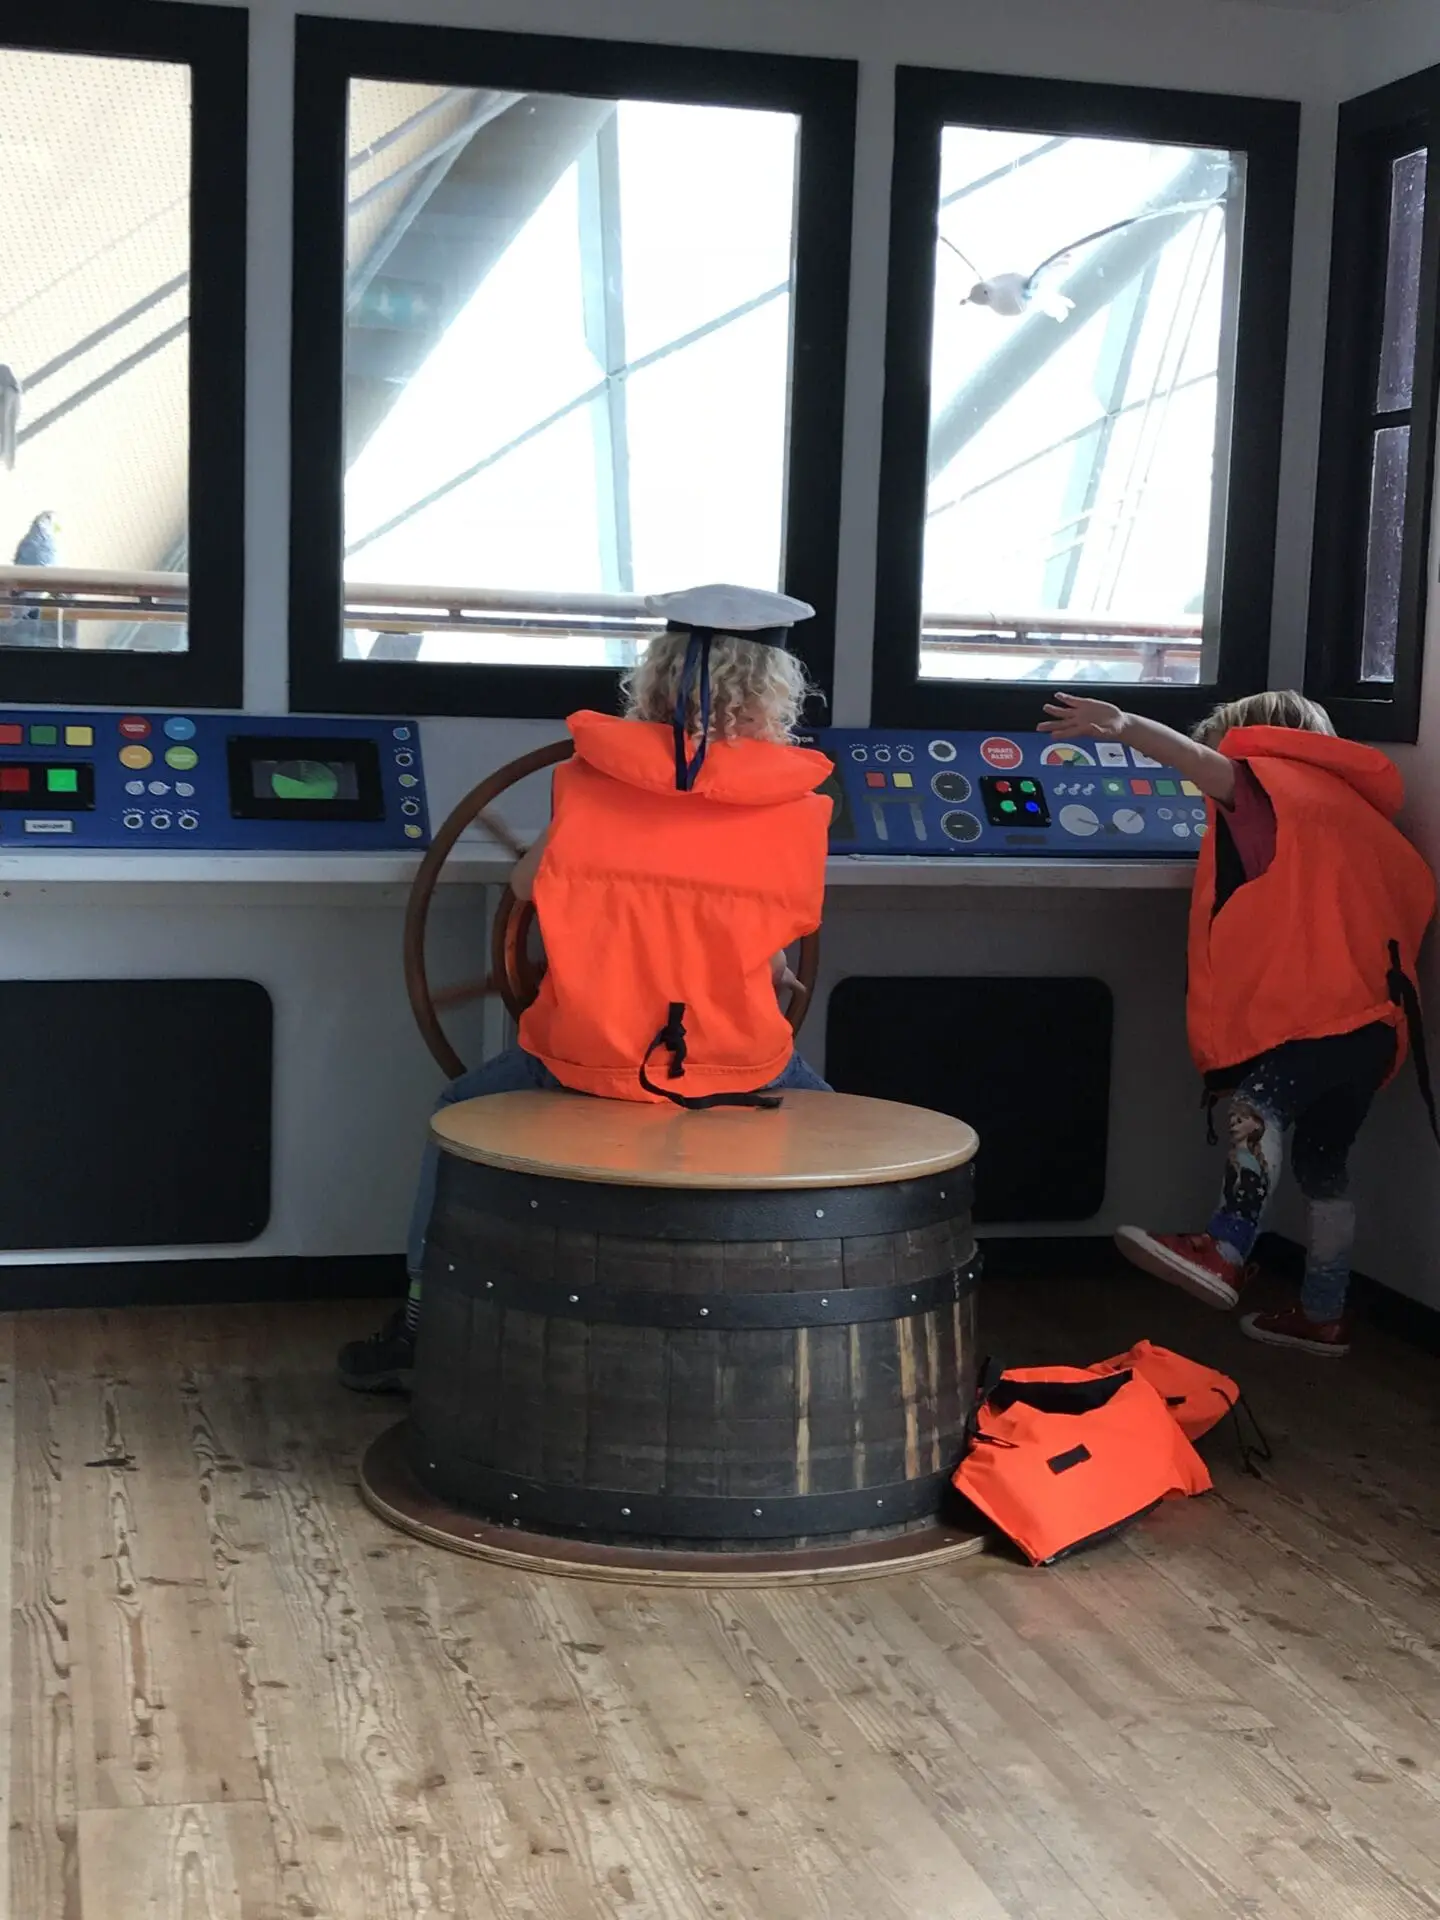 Children in ship at science centre